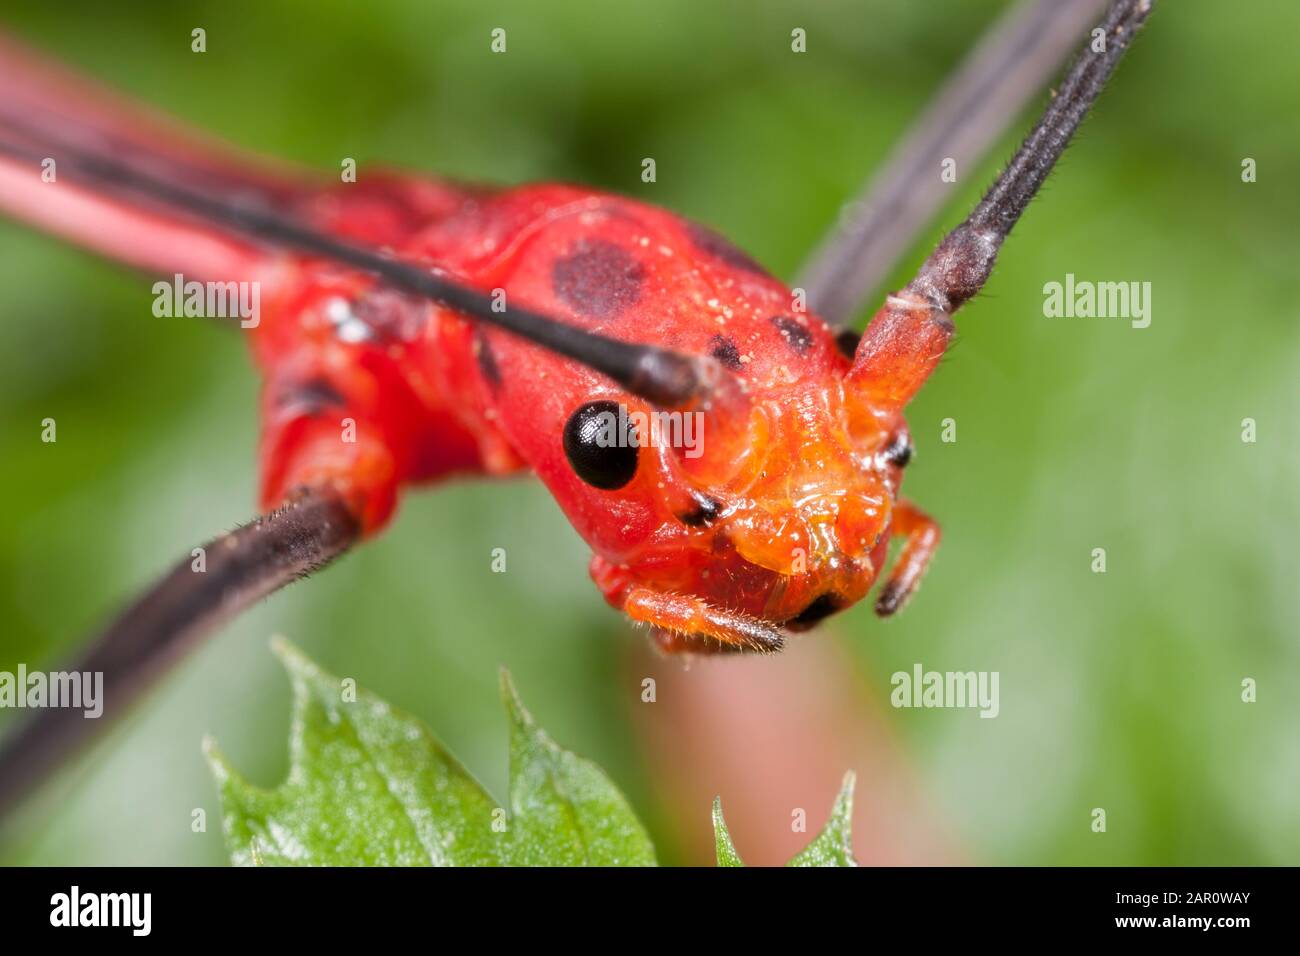 Peruvian Stick Insect (Oreophoetes peruana) Bright red male. This species feeds on ferns in Peru and Ecuador. Stock Photo